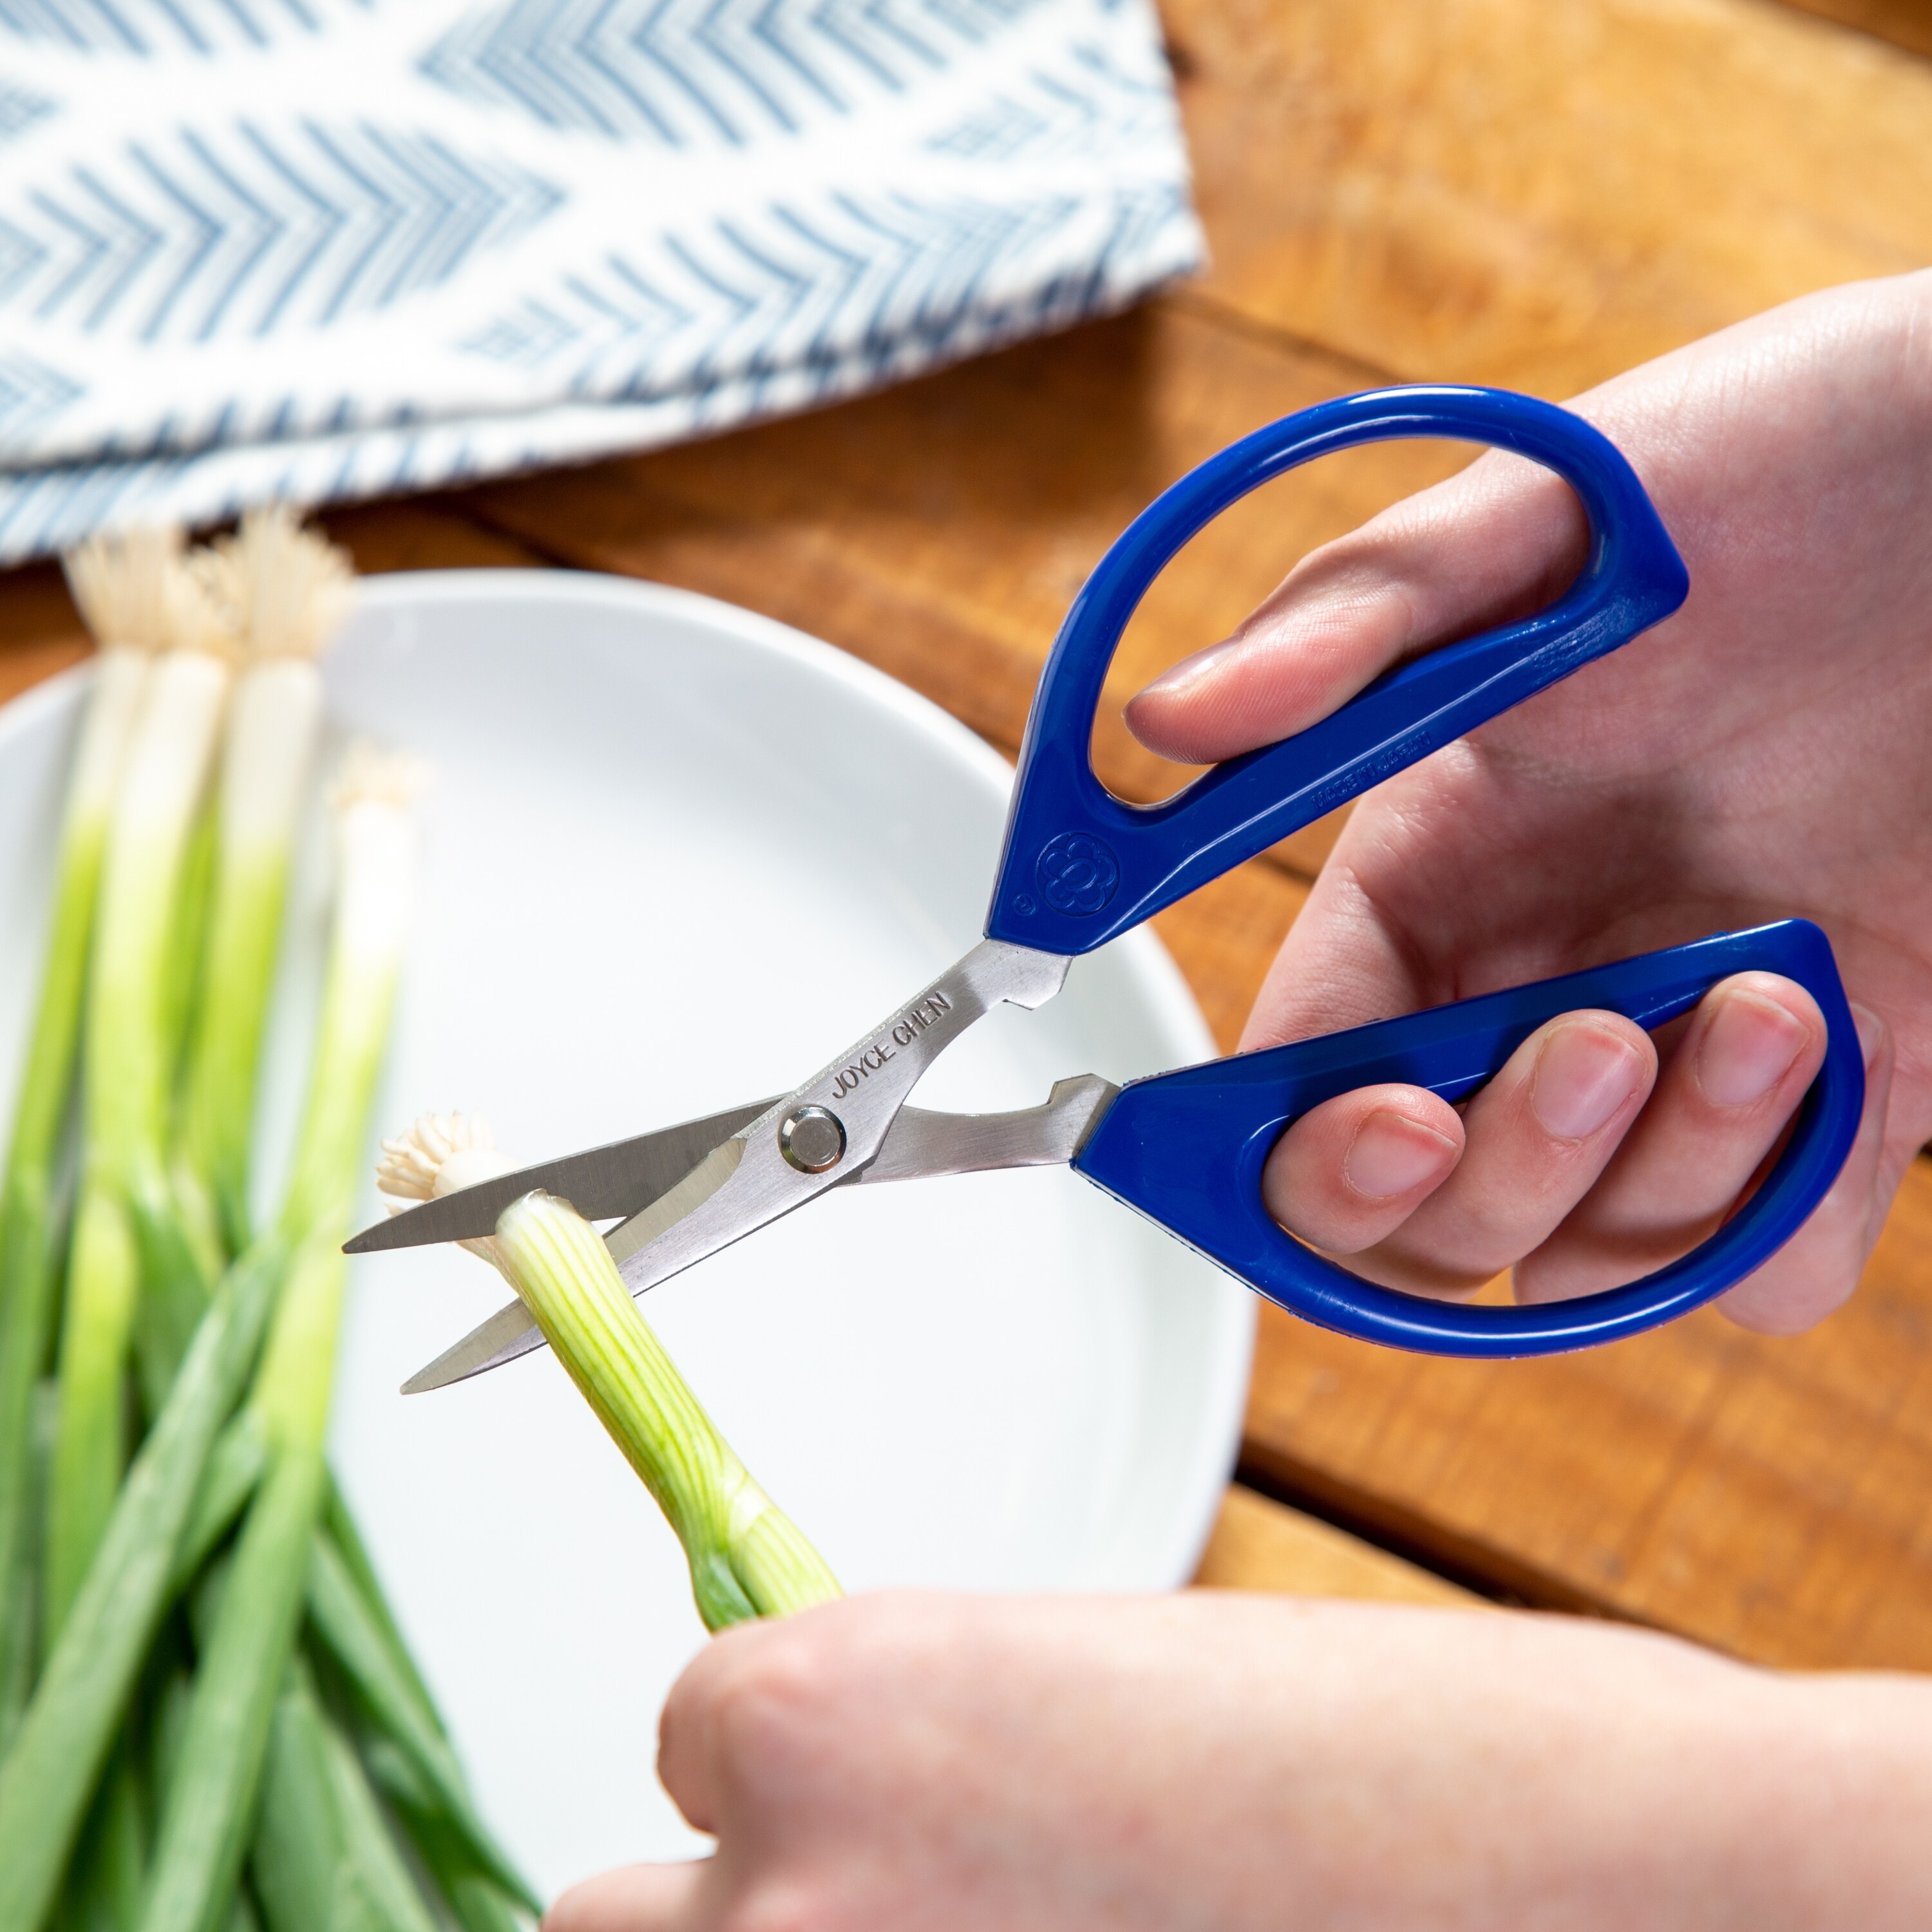 https://ak1.ostkcdn.com/images/products/is/images/direct/f7123a61e2411df8d73f9046ef501452c62b19d4/Blue-Joyce-Chen-Original-Unlimited-Kitchen-Scissors-%282-Pack%29.jpg